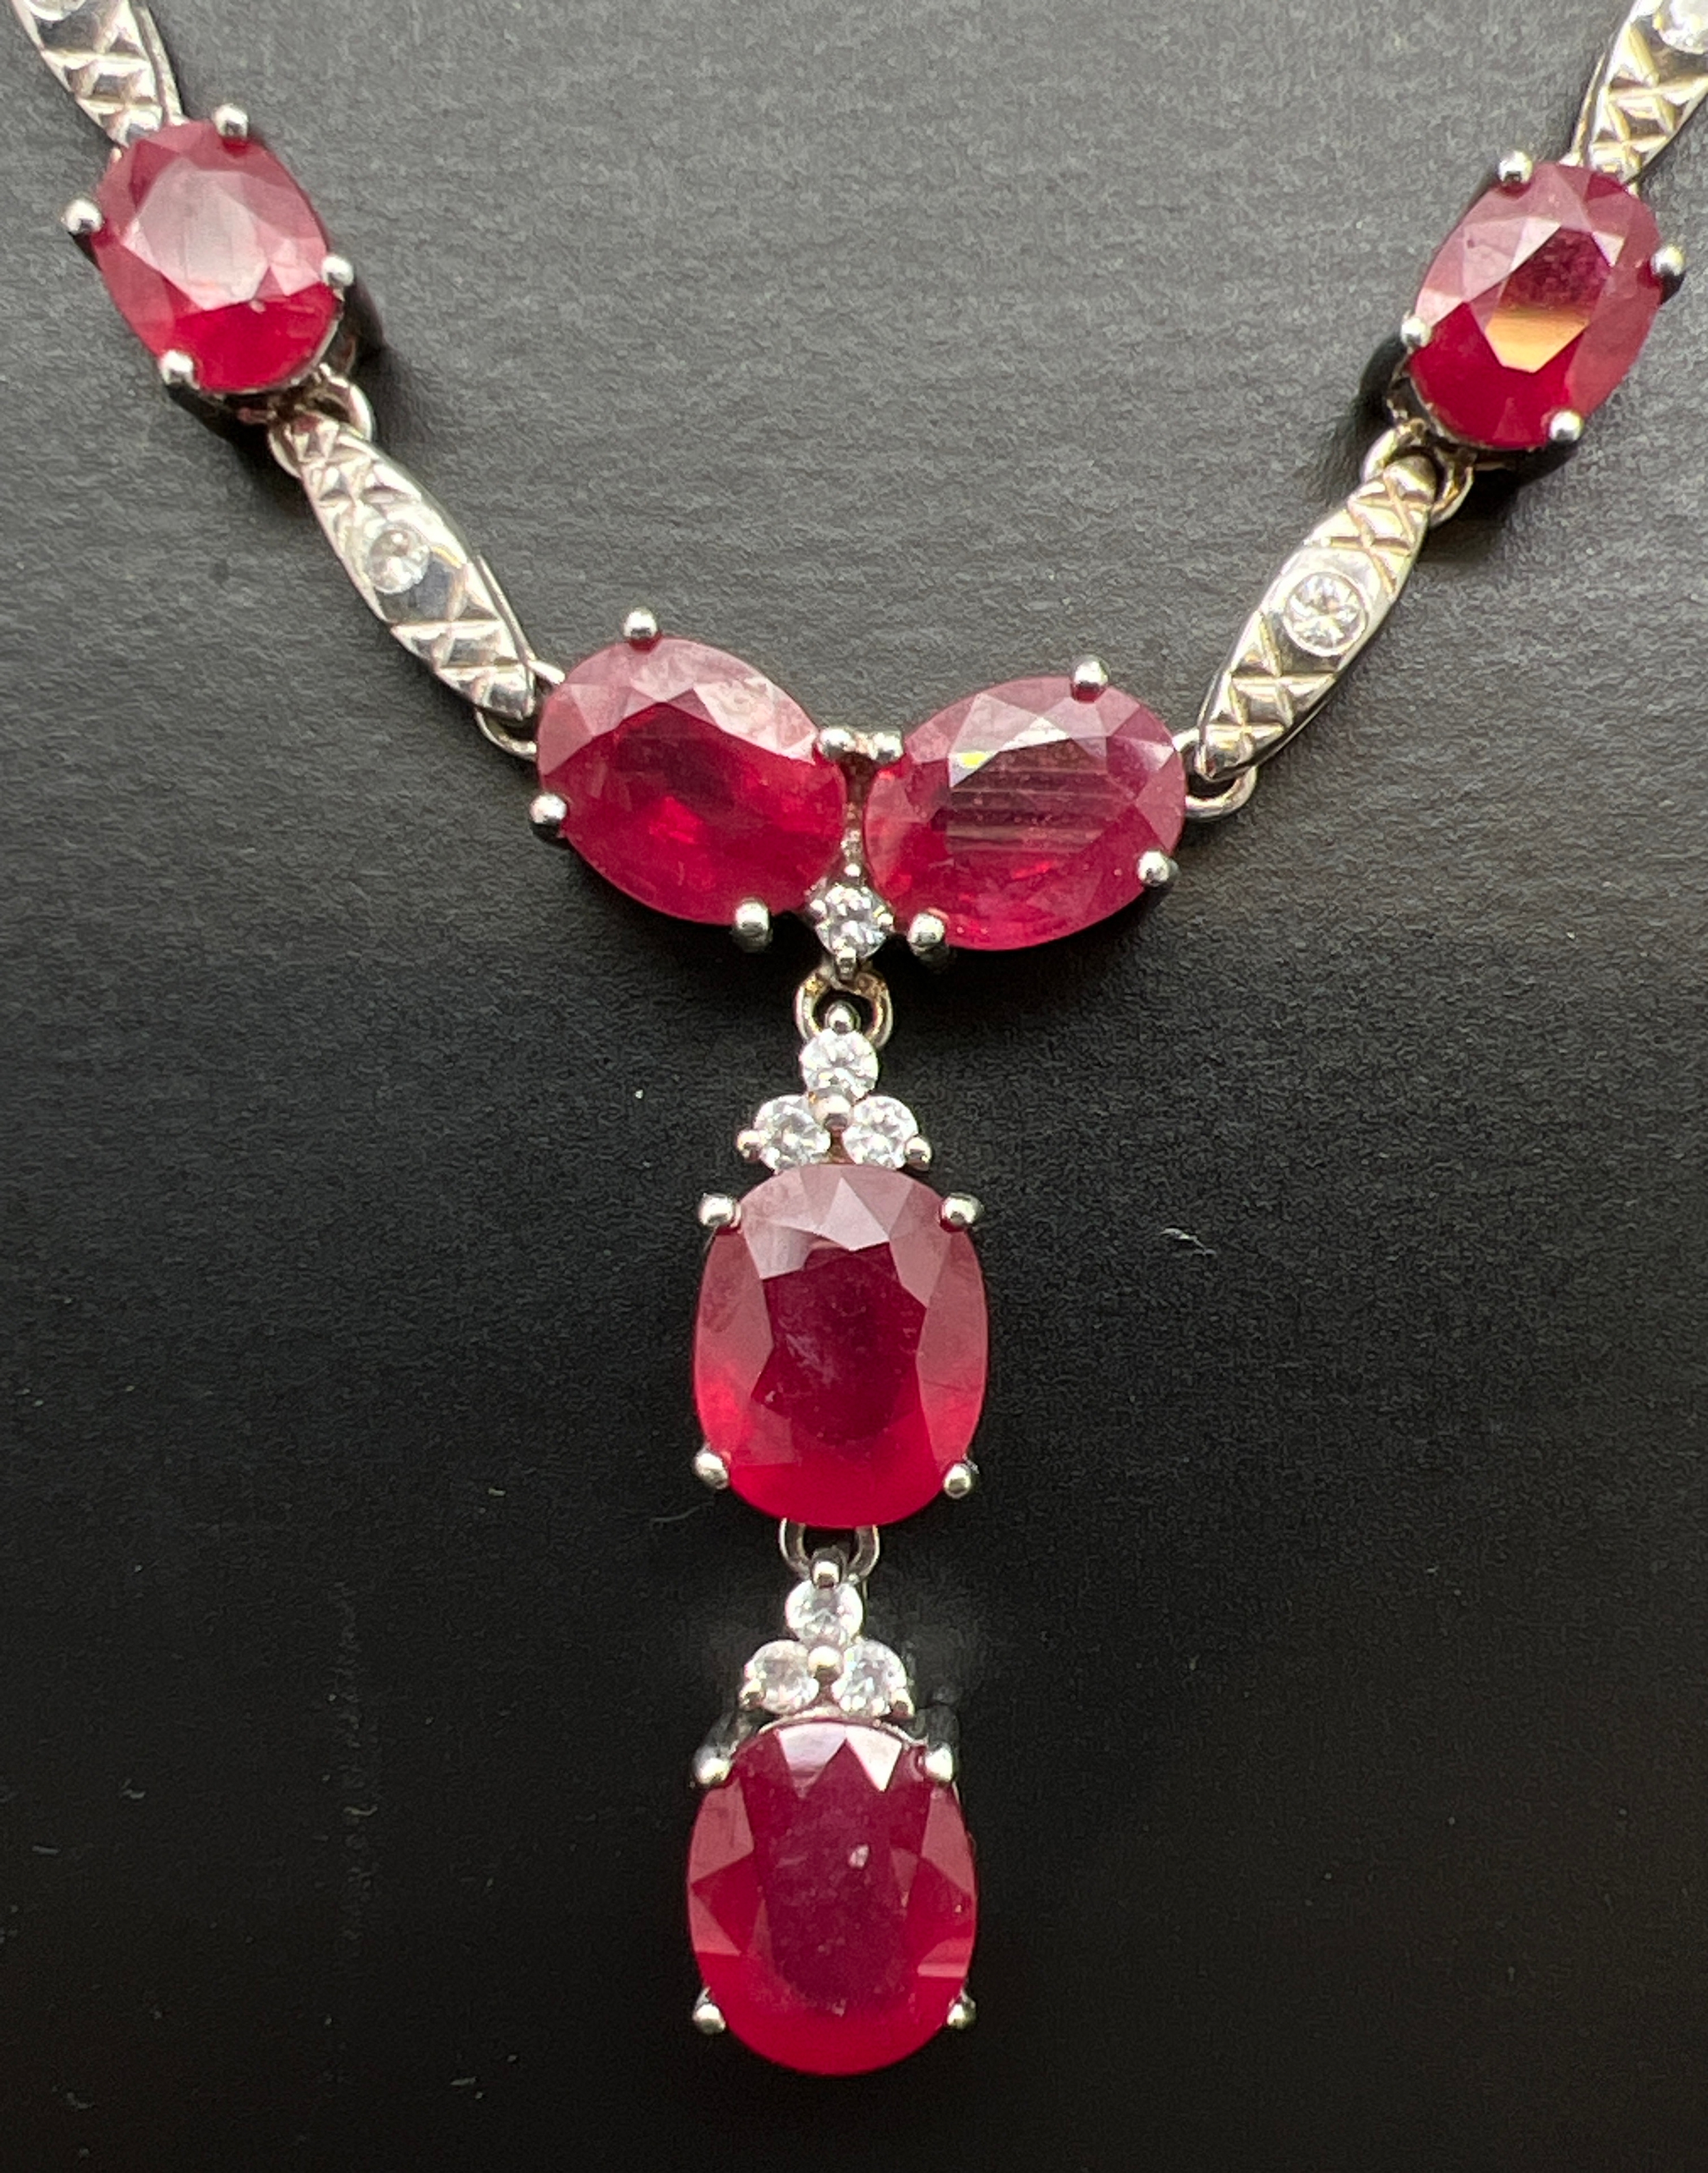 A silver ruby and white topaz fixed drop pendant necklace with spring ring clasp, by The Genuine Gem - Image 2 of 3